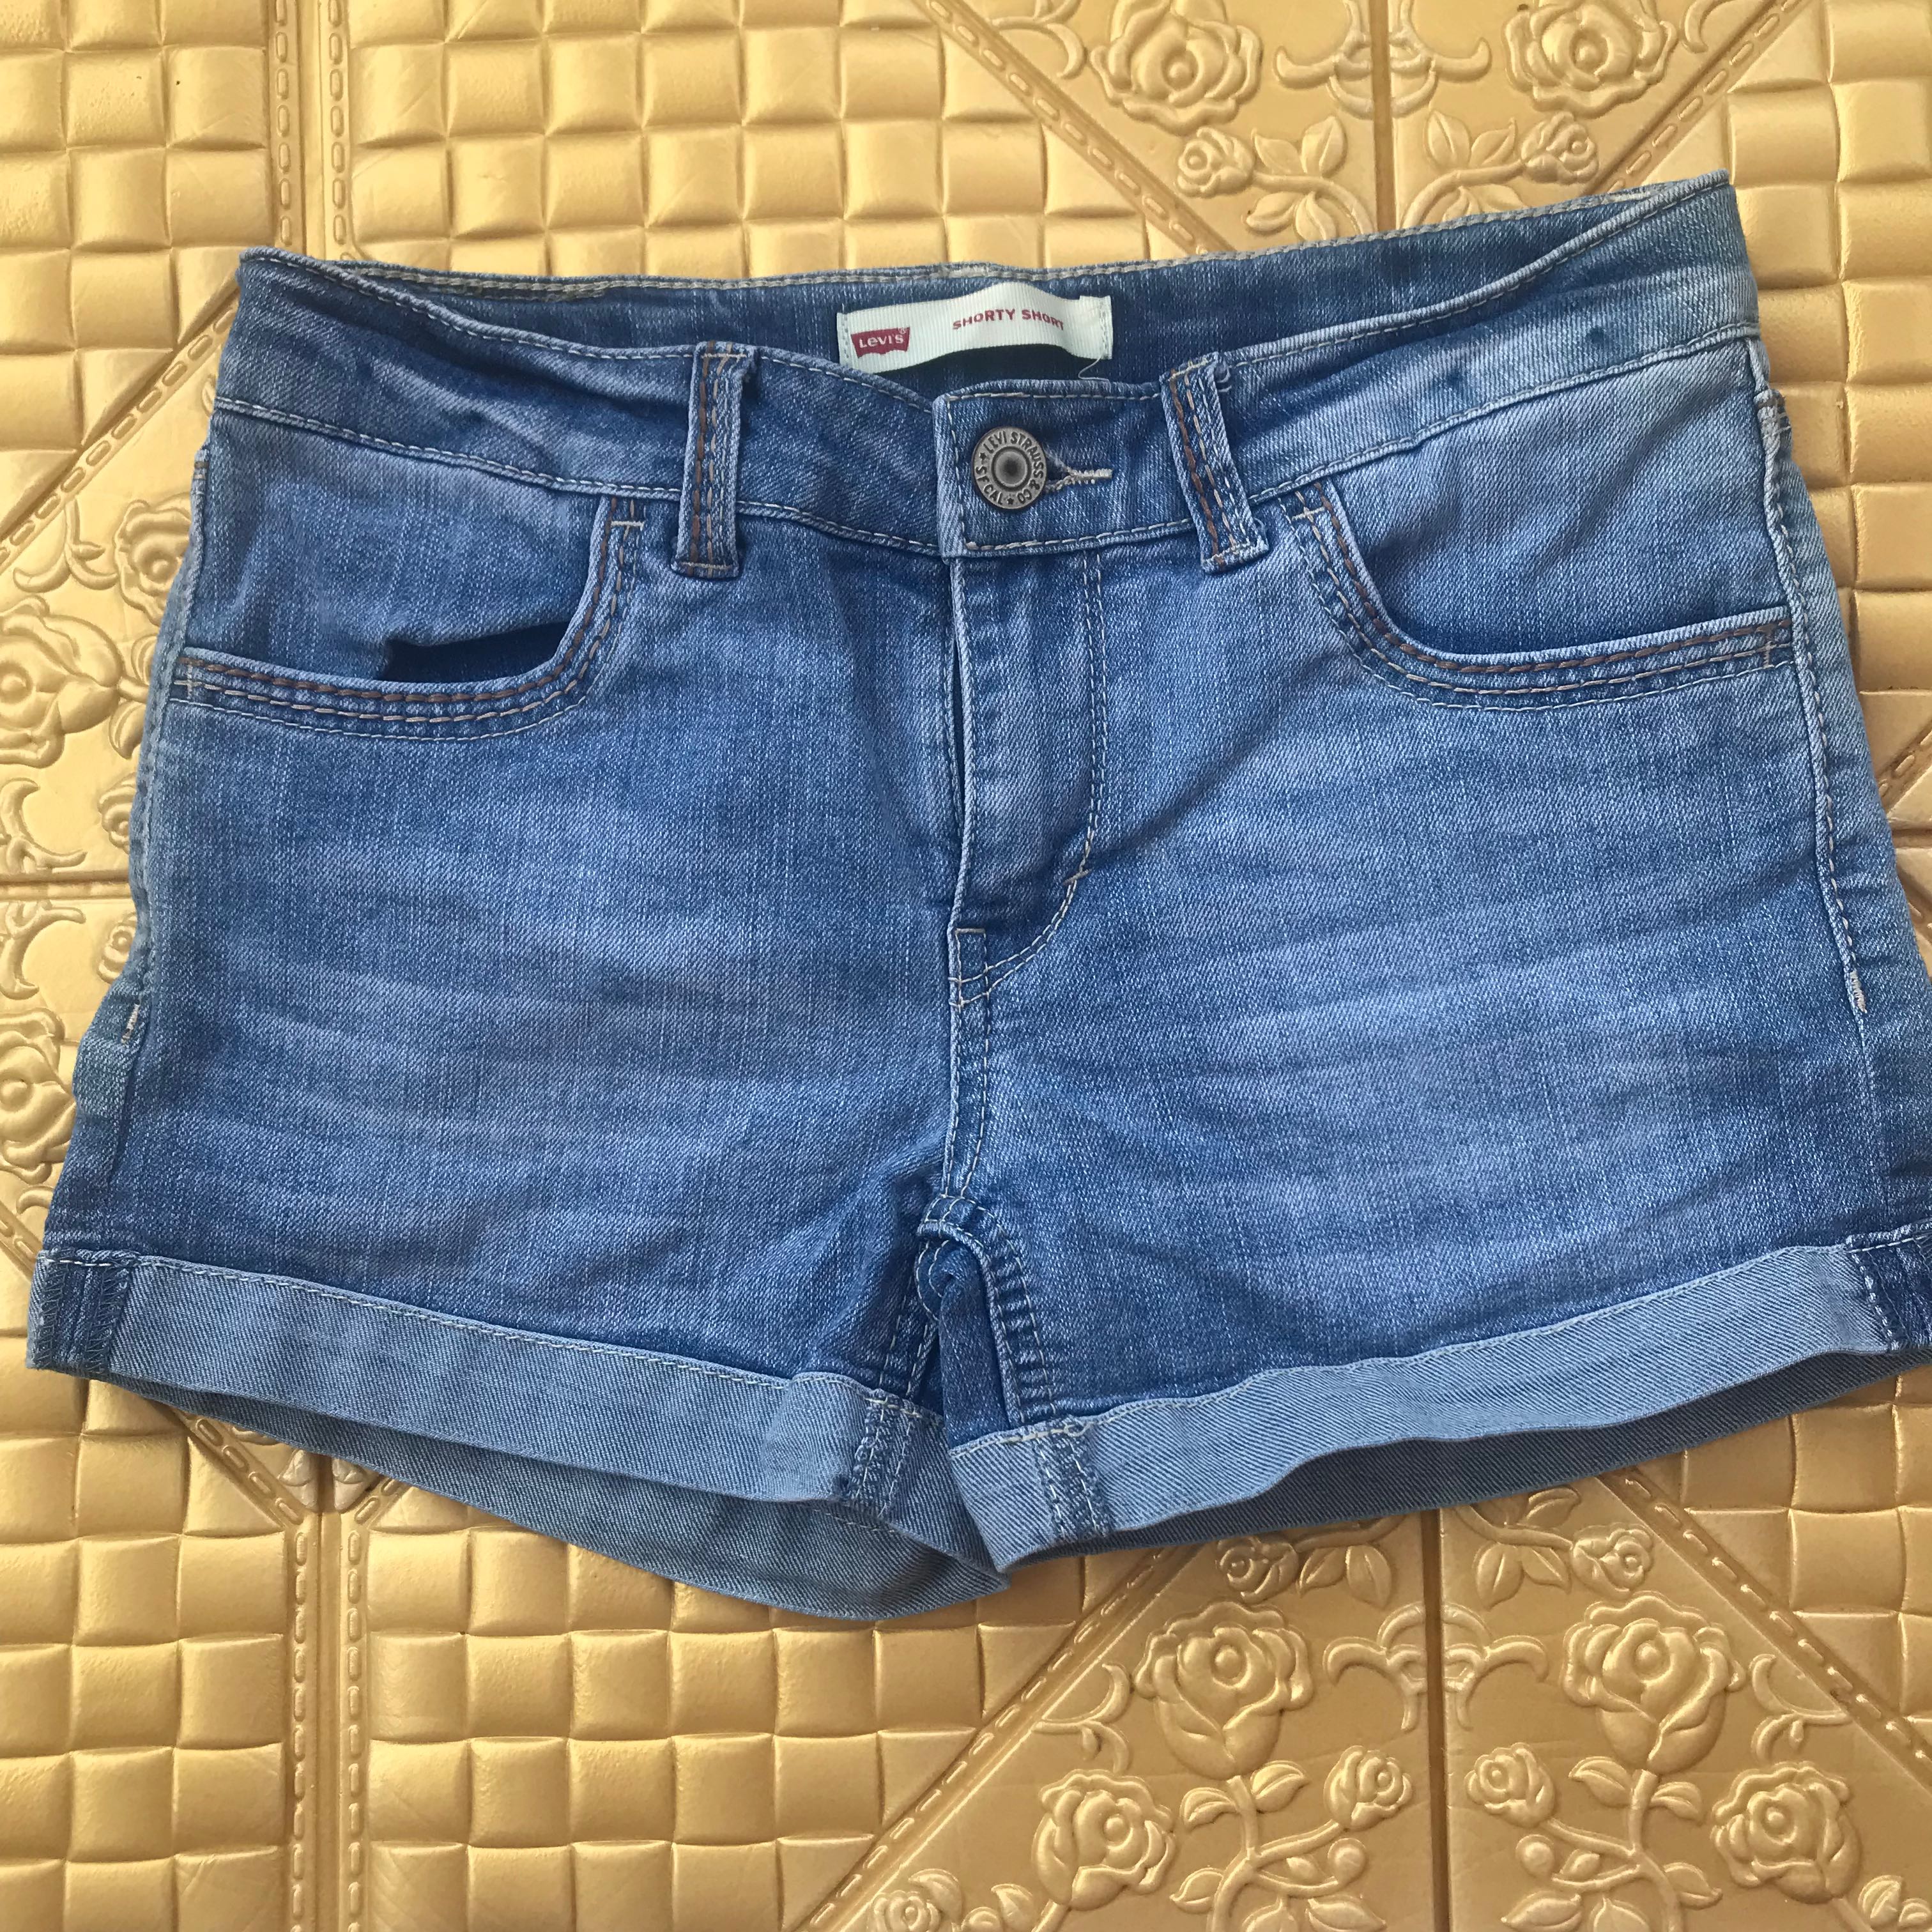 Levis Shorty shorts, Babies & Kids, Babies & Kids Fashion on Carousell